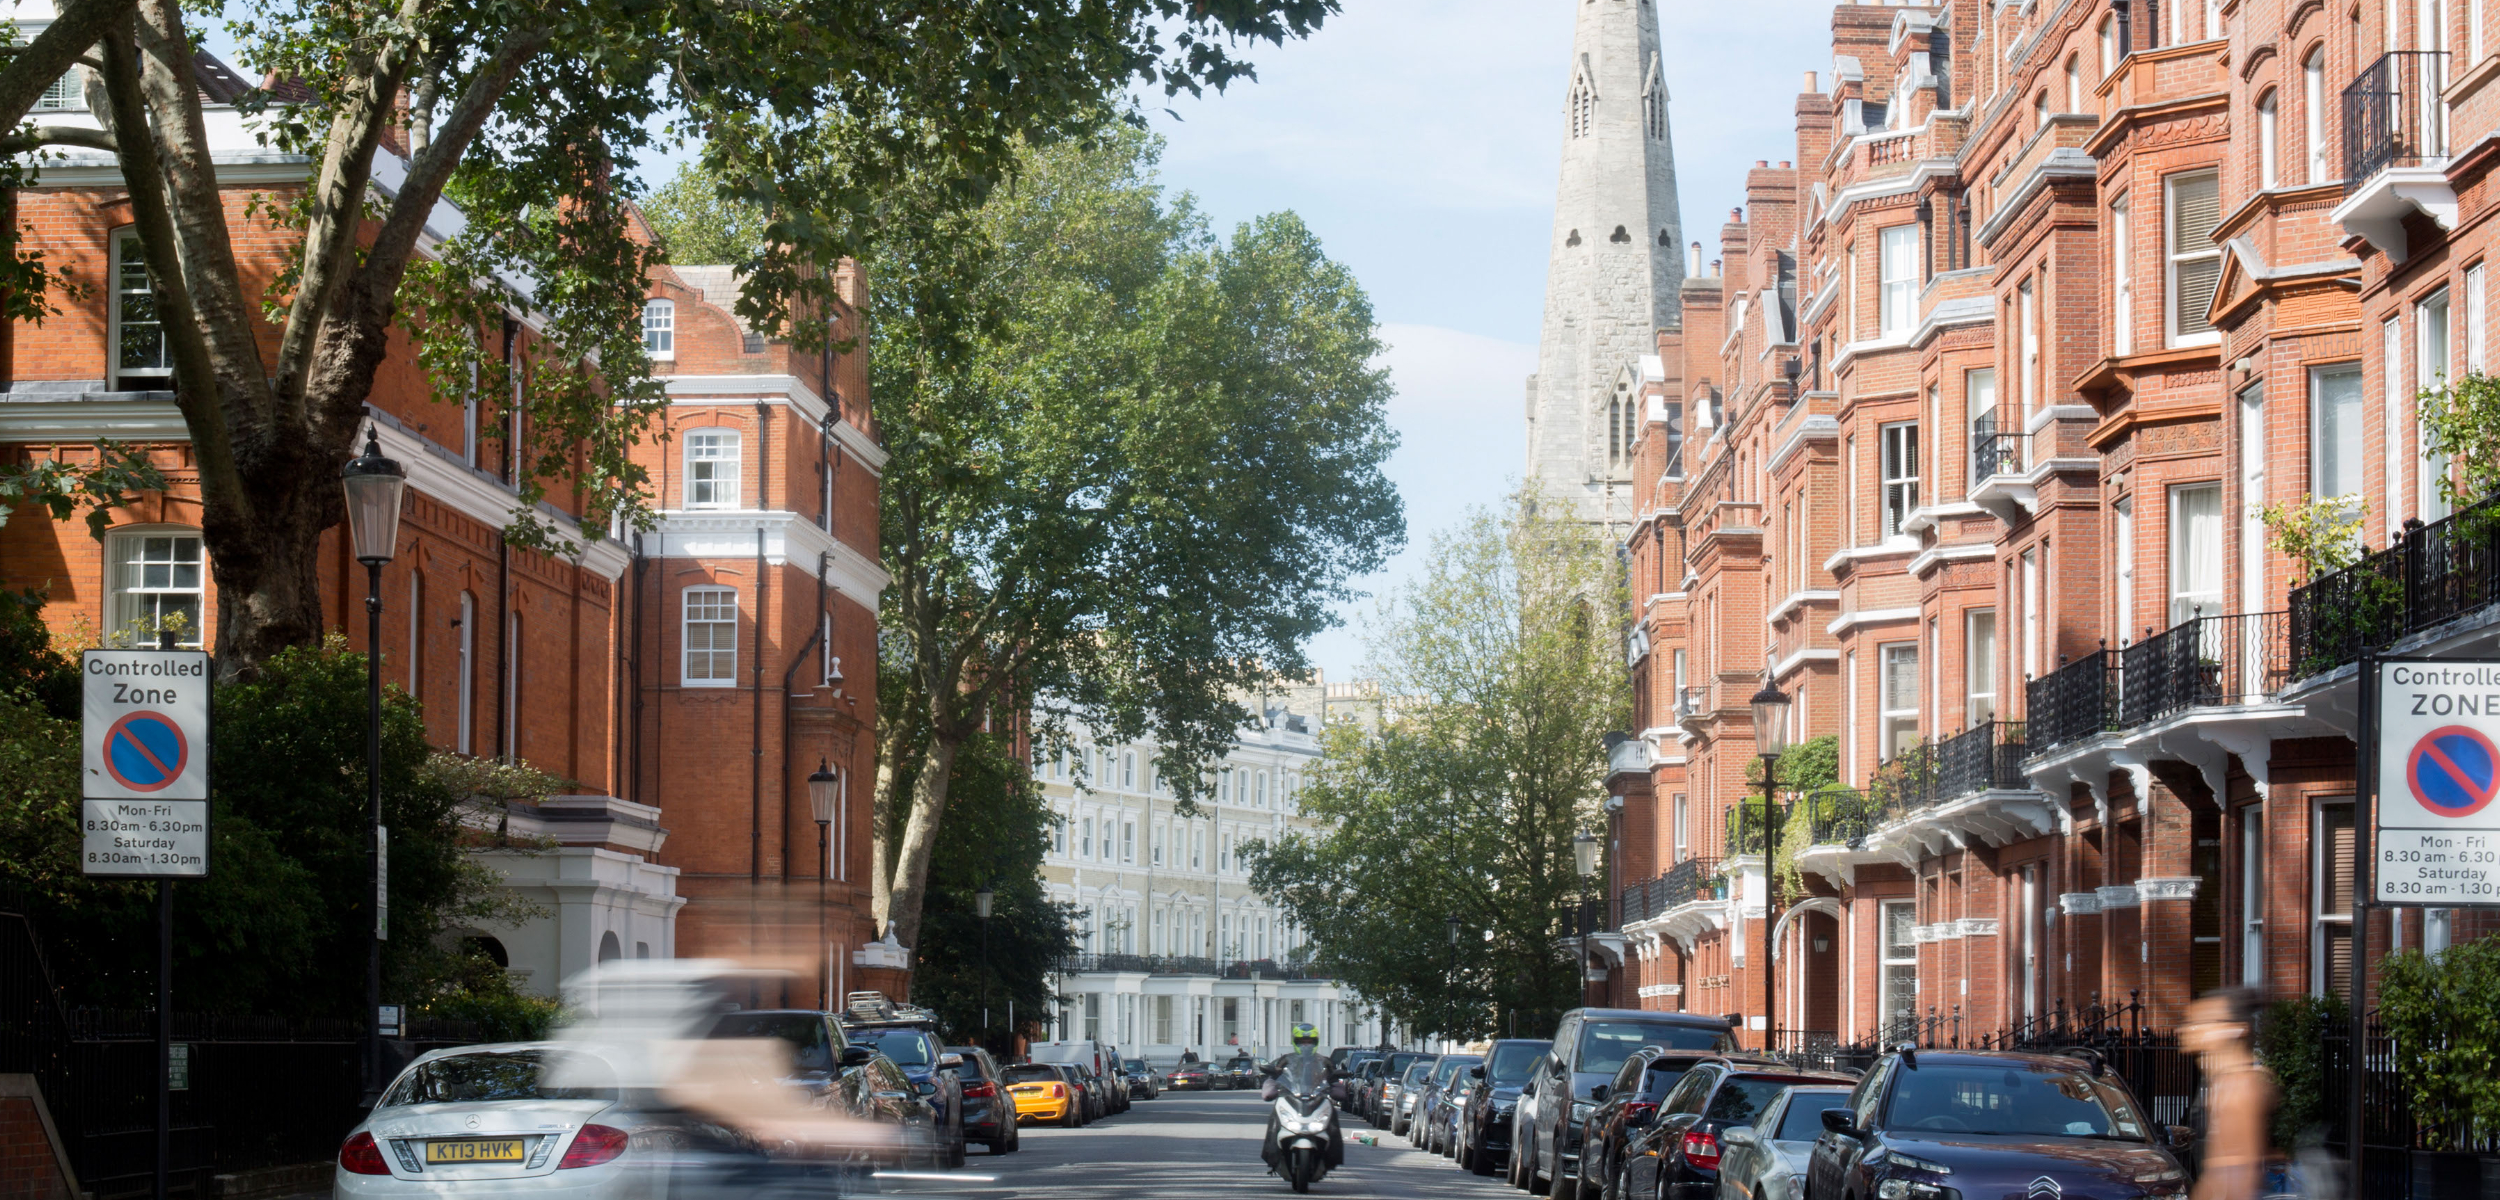 At Sloane Stanley, we know the must-visit hotspots to consider when visiting or living in Chelsea. Get in touch to find out more about our properties.